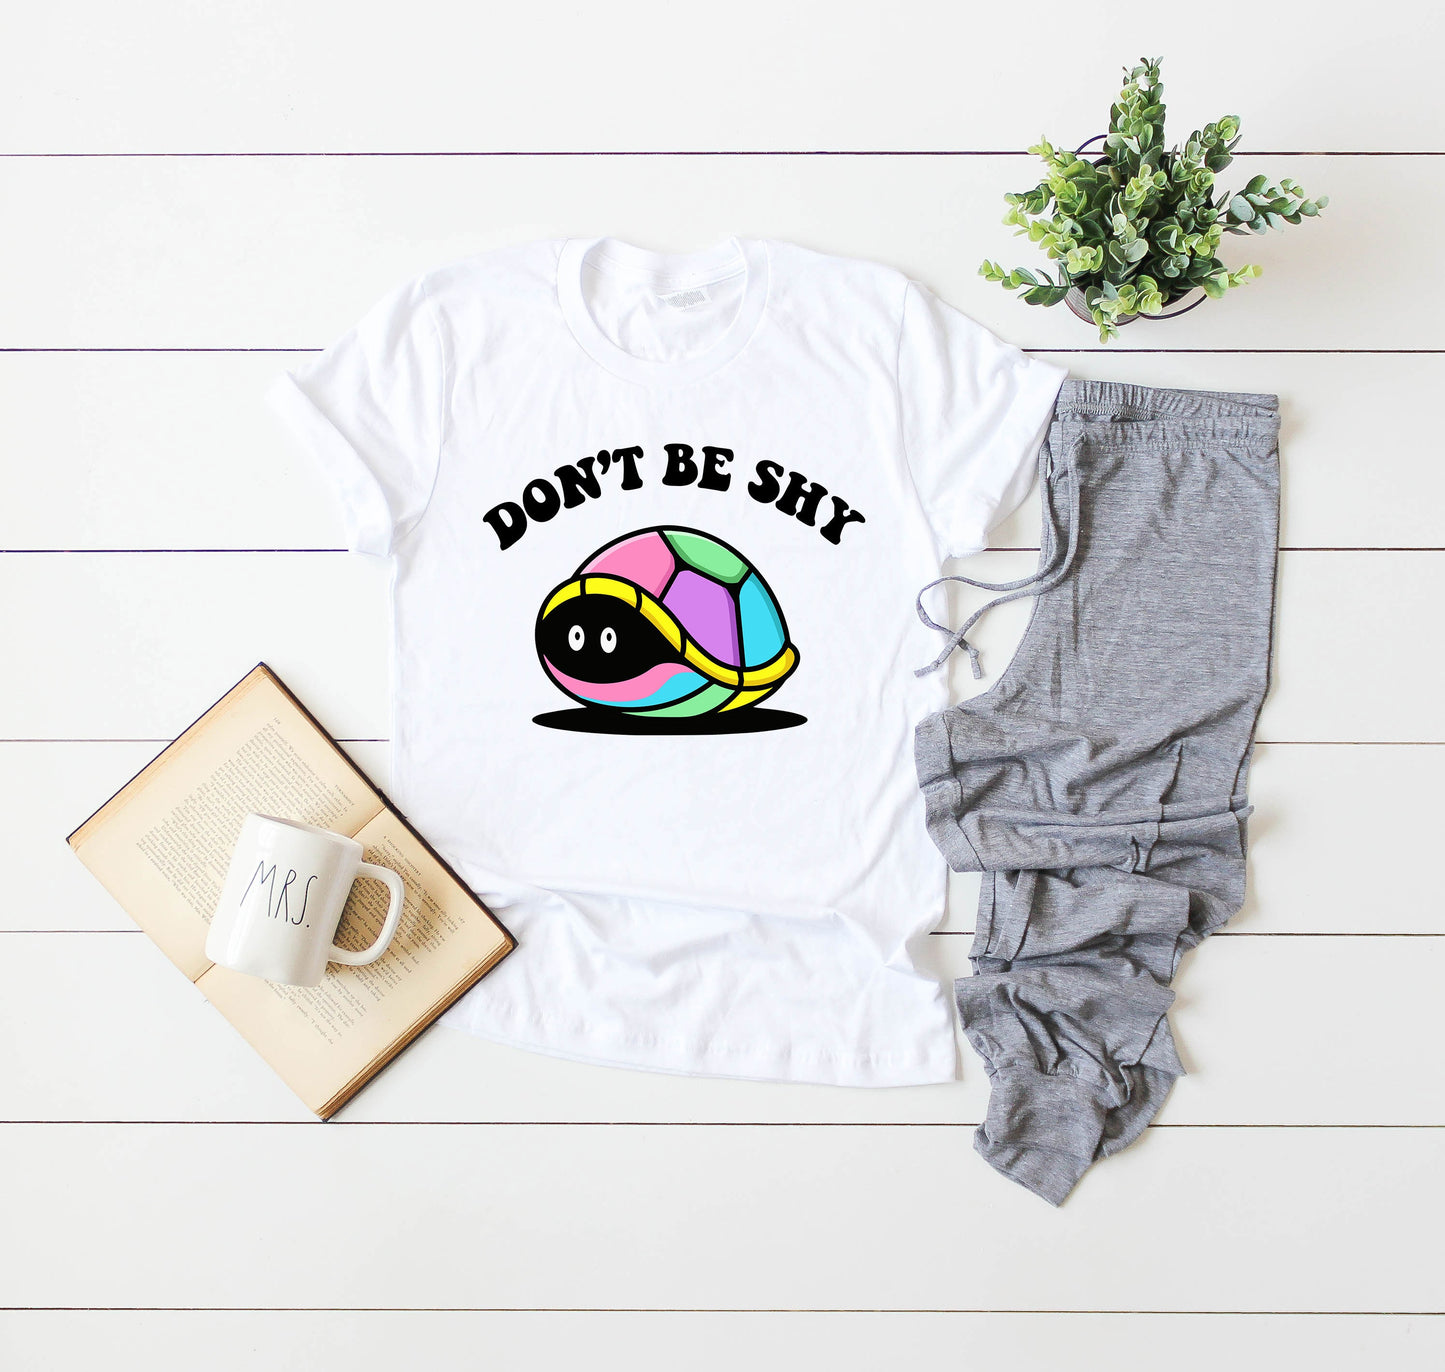 Don't Be Shy Cute Turtle Shell 80's Retro Bright Animal Graphic Tee (Unisex Bella Canvas for Women / Men)